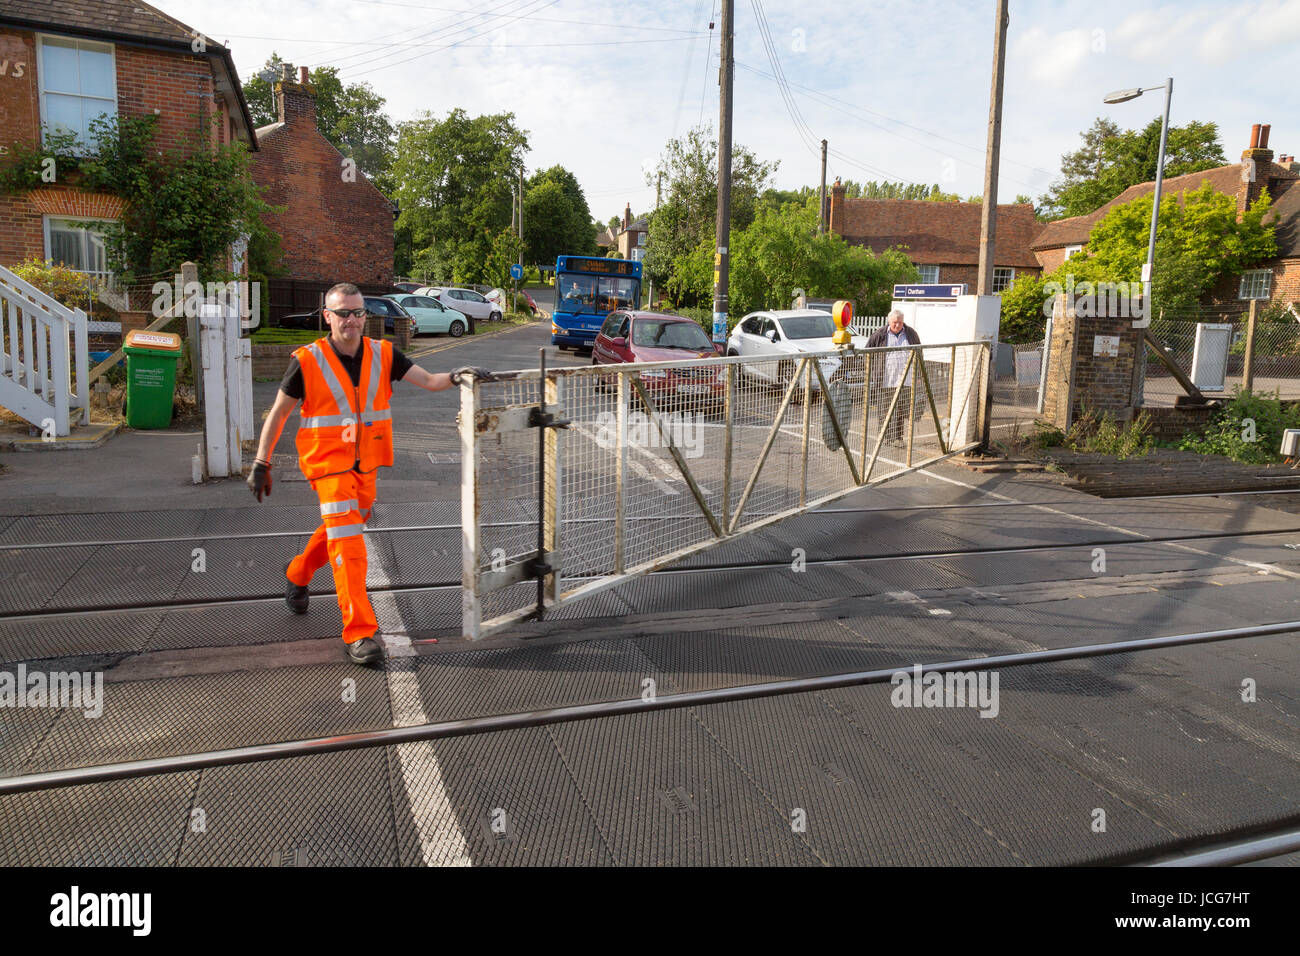 Railway worker opening the gates at a Manual level crossing, Chartham, Kent England UK Stock Photo